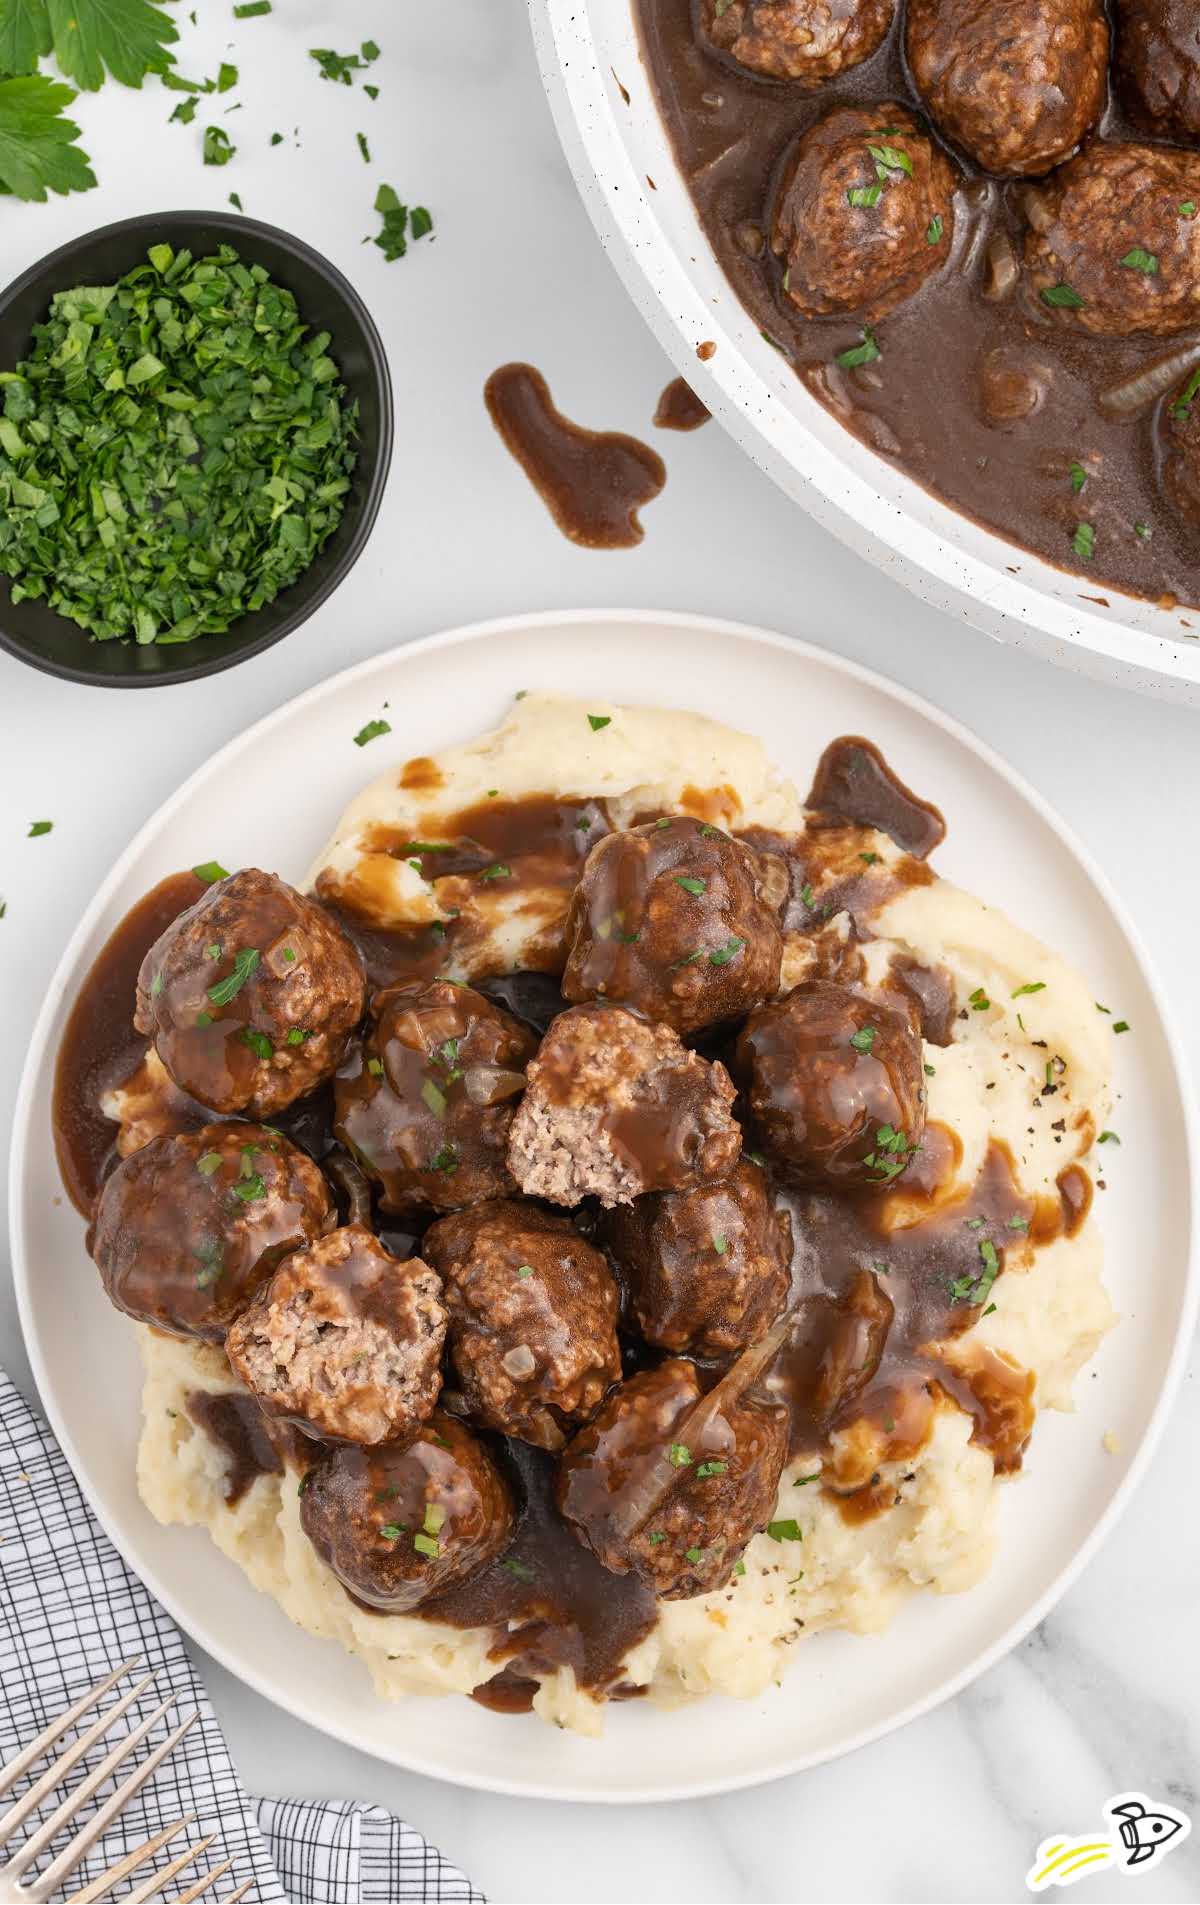 a plate of meatballs garnished with parsley and served over mashed potatoes